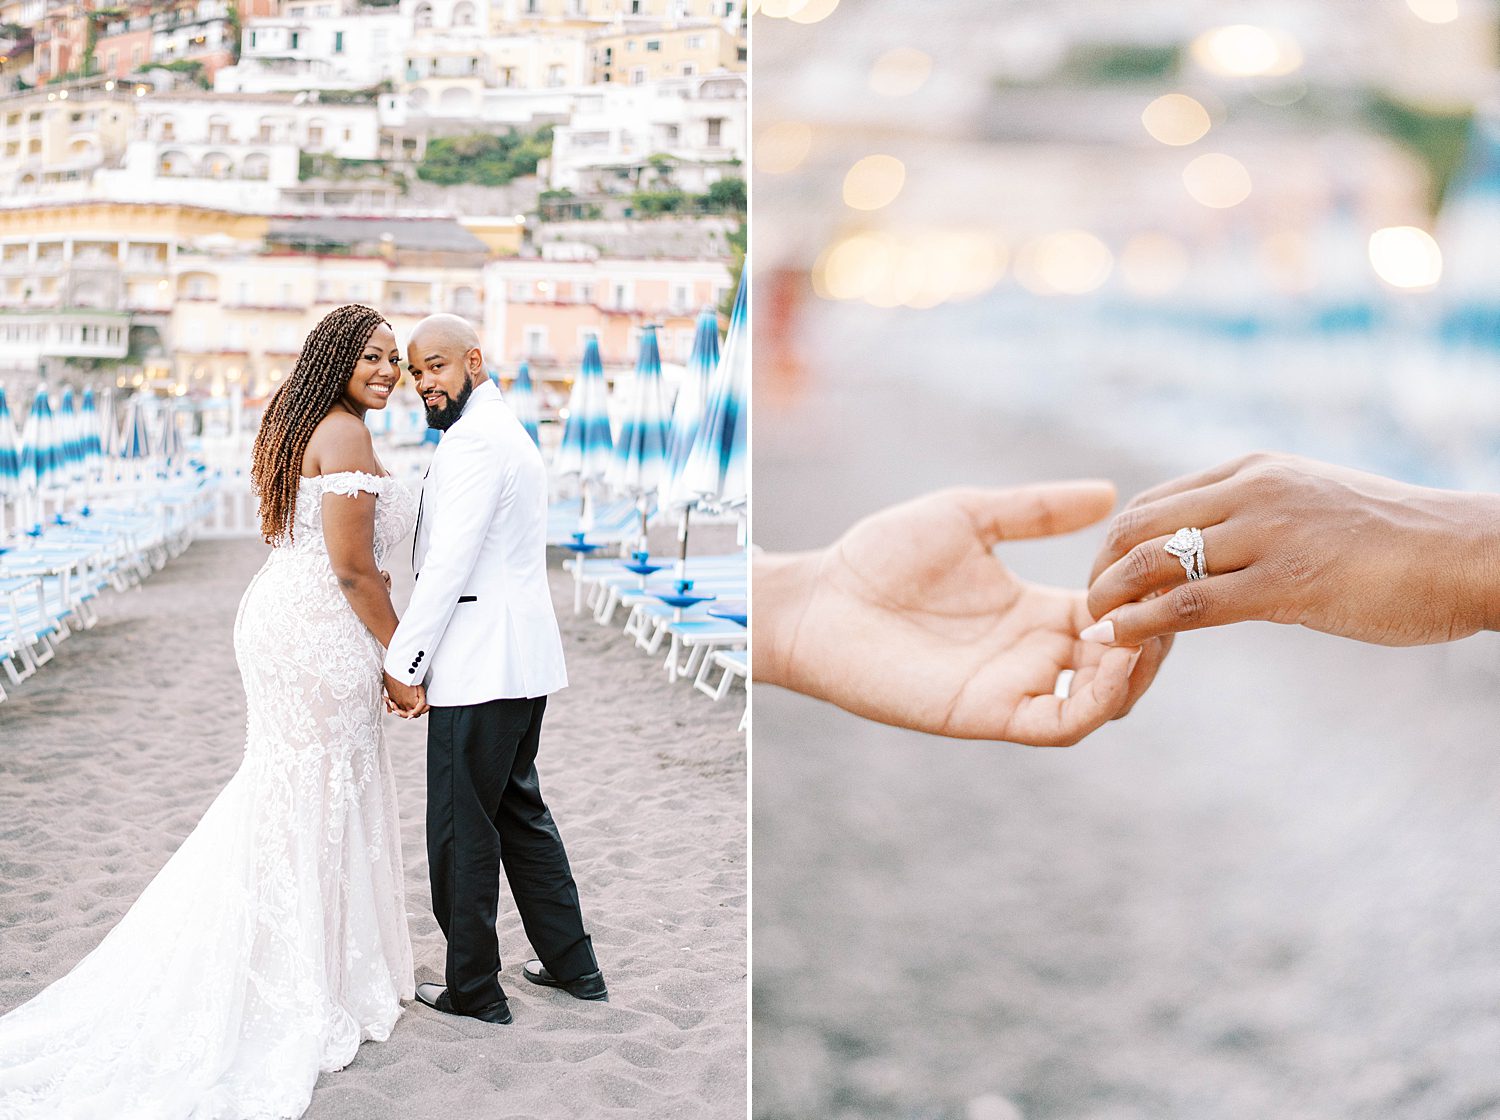 bride and groom pose on Positano beach by blue and white umbrellas